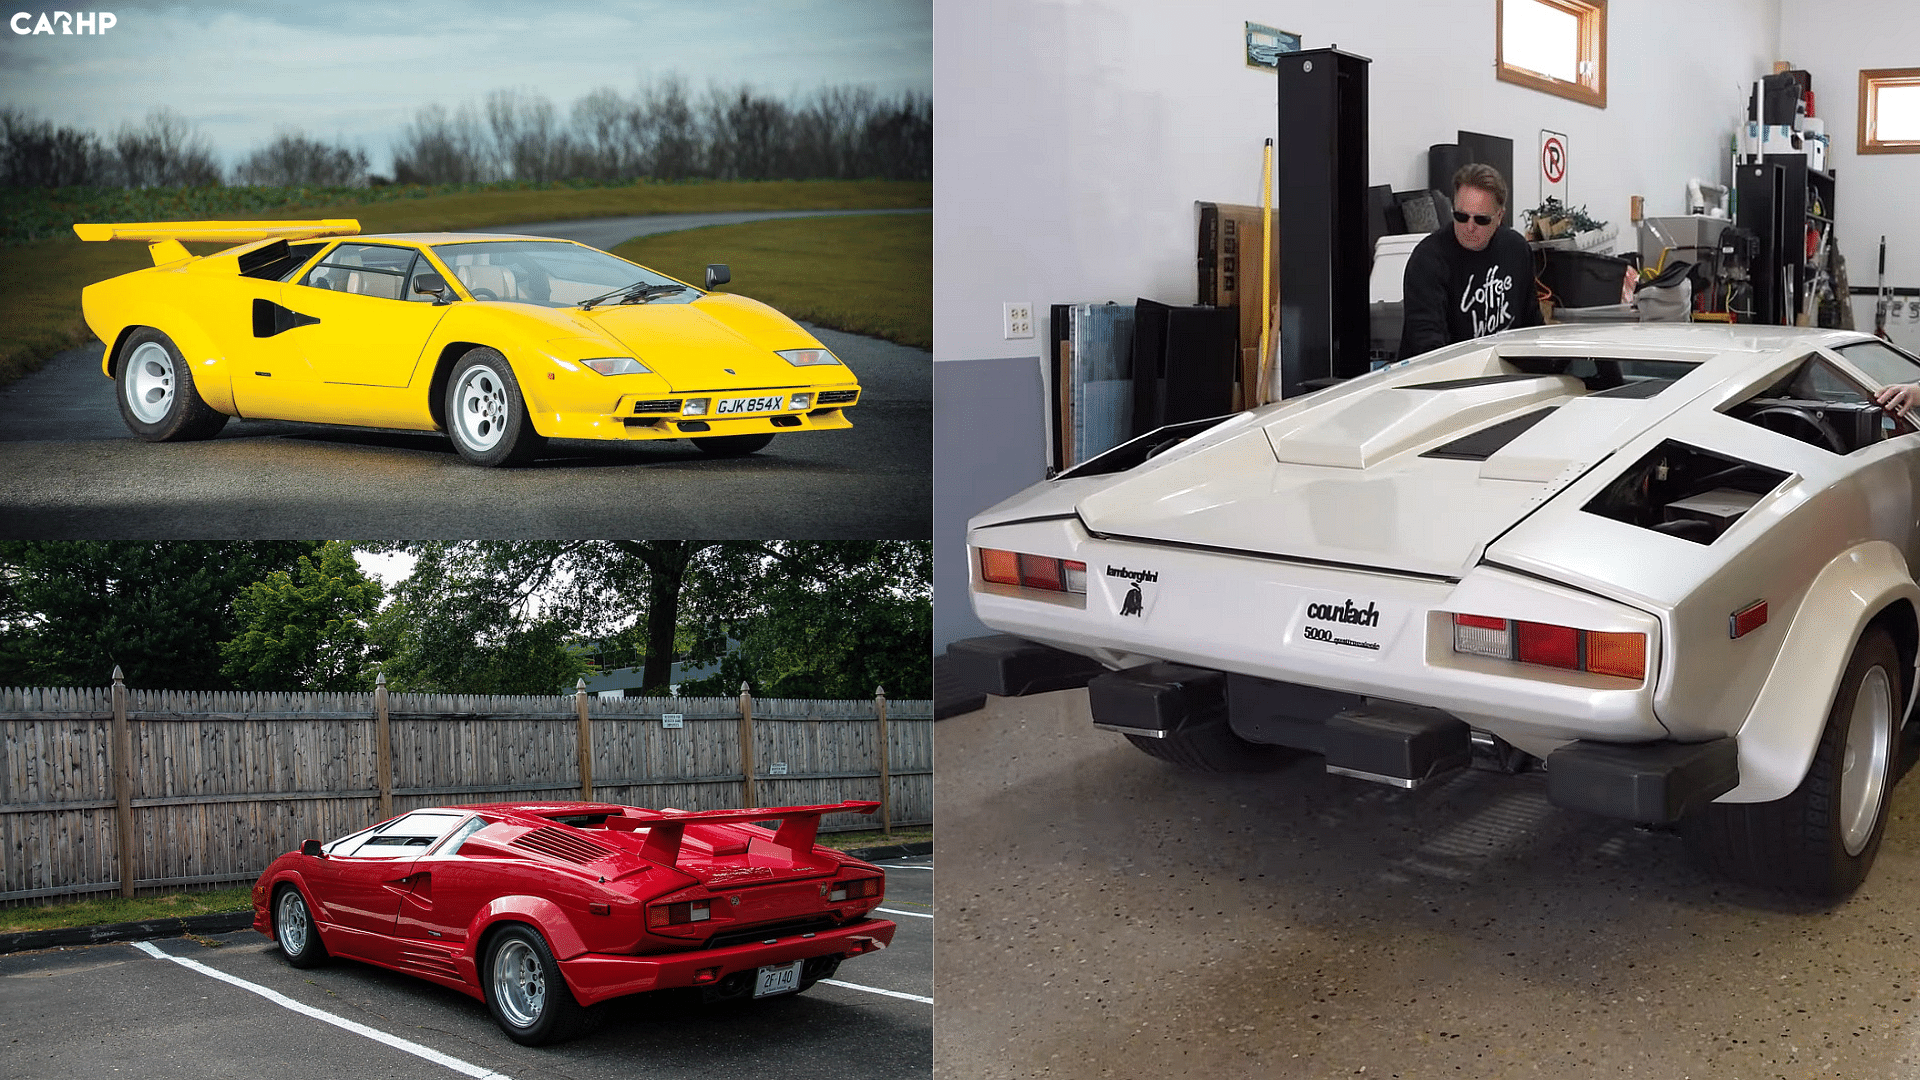 Top 10 Things You Need To Know About the Original Lamborghini Countach